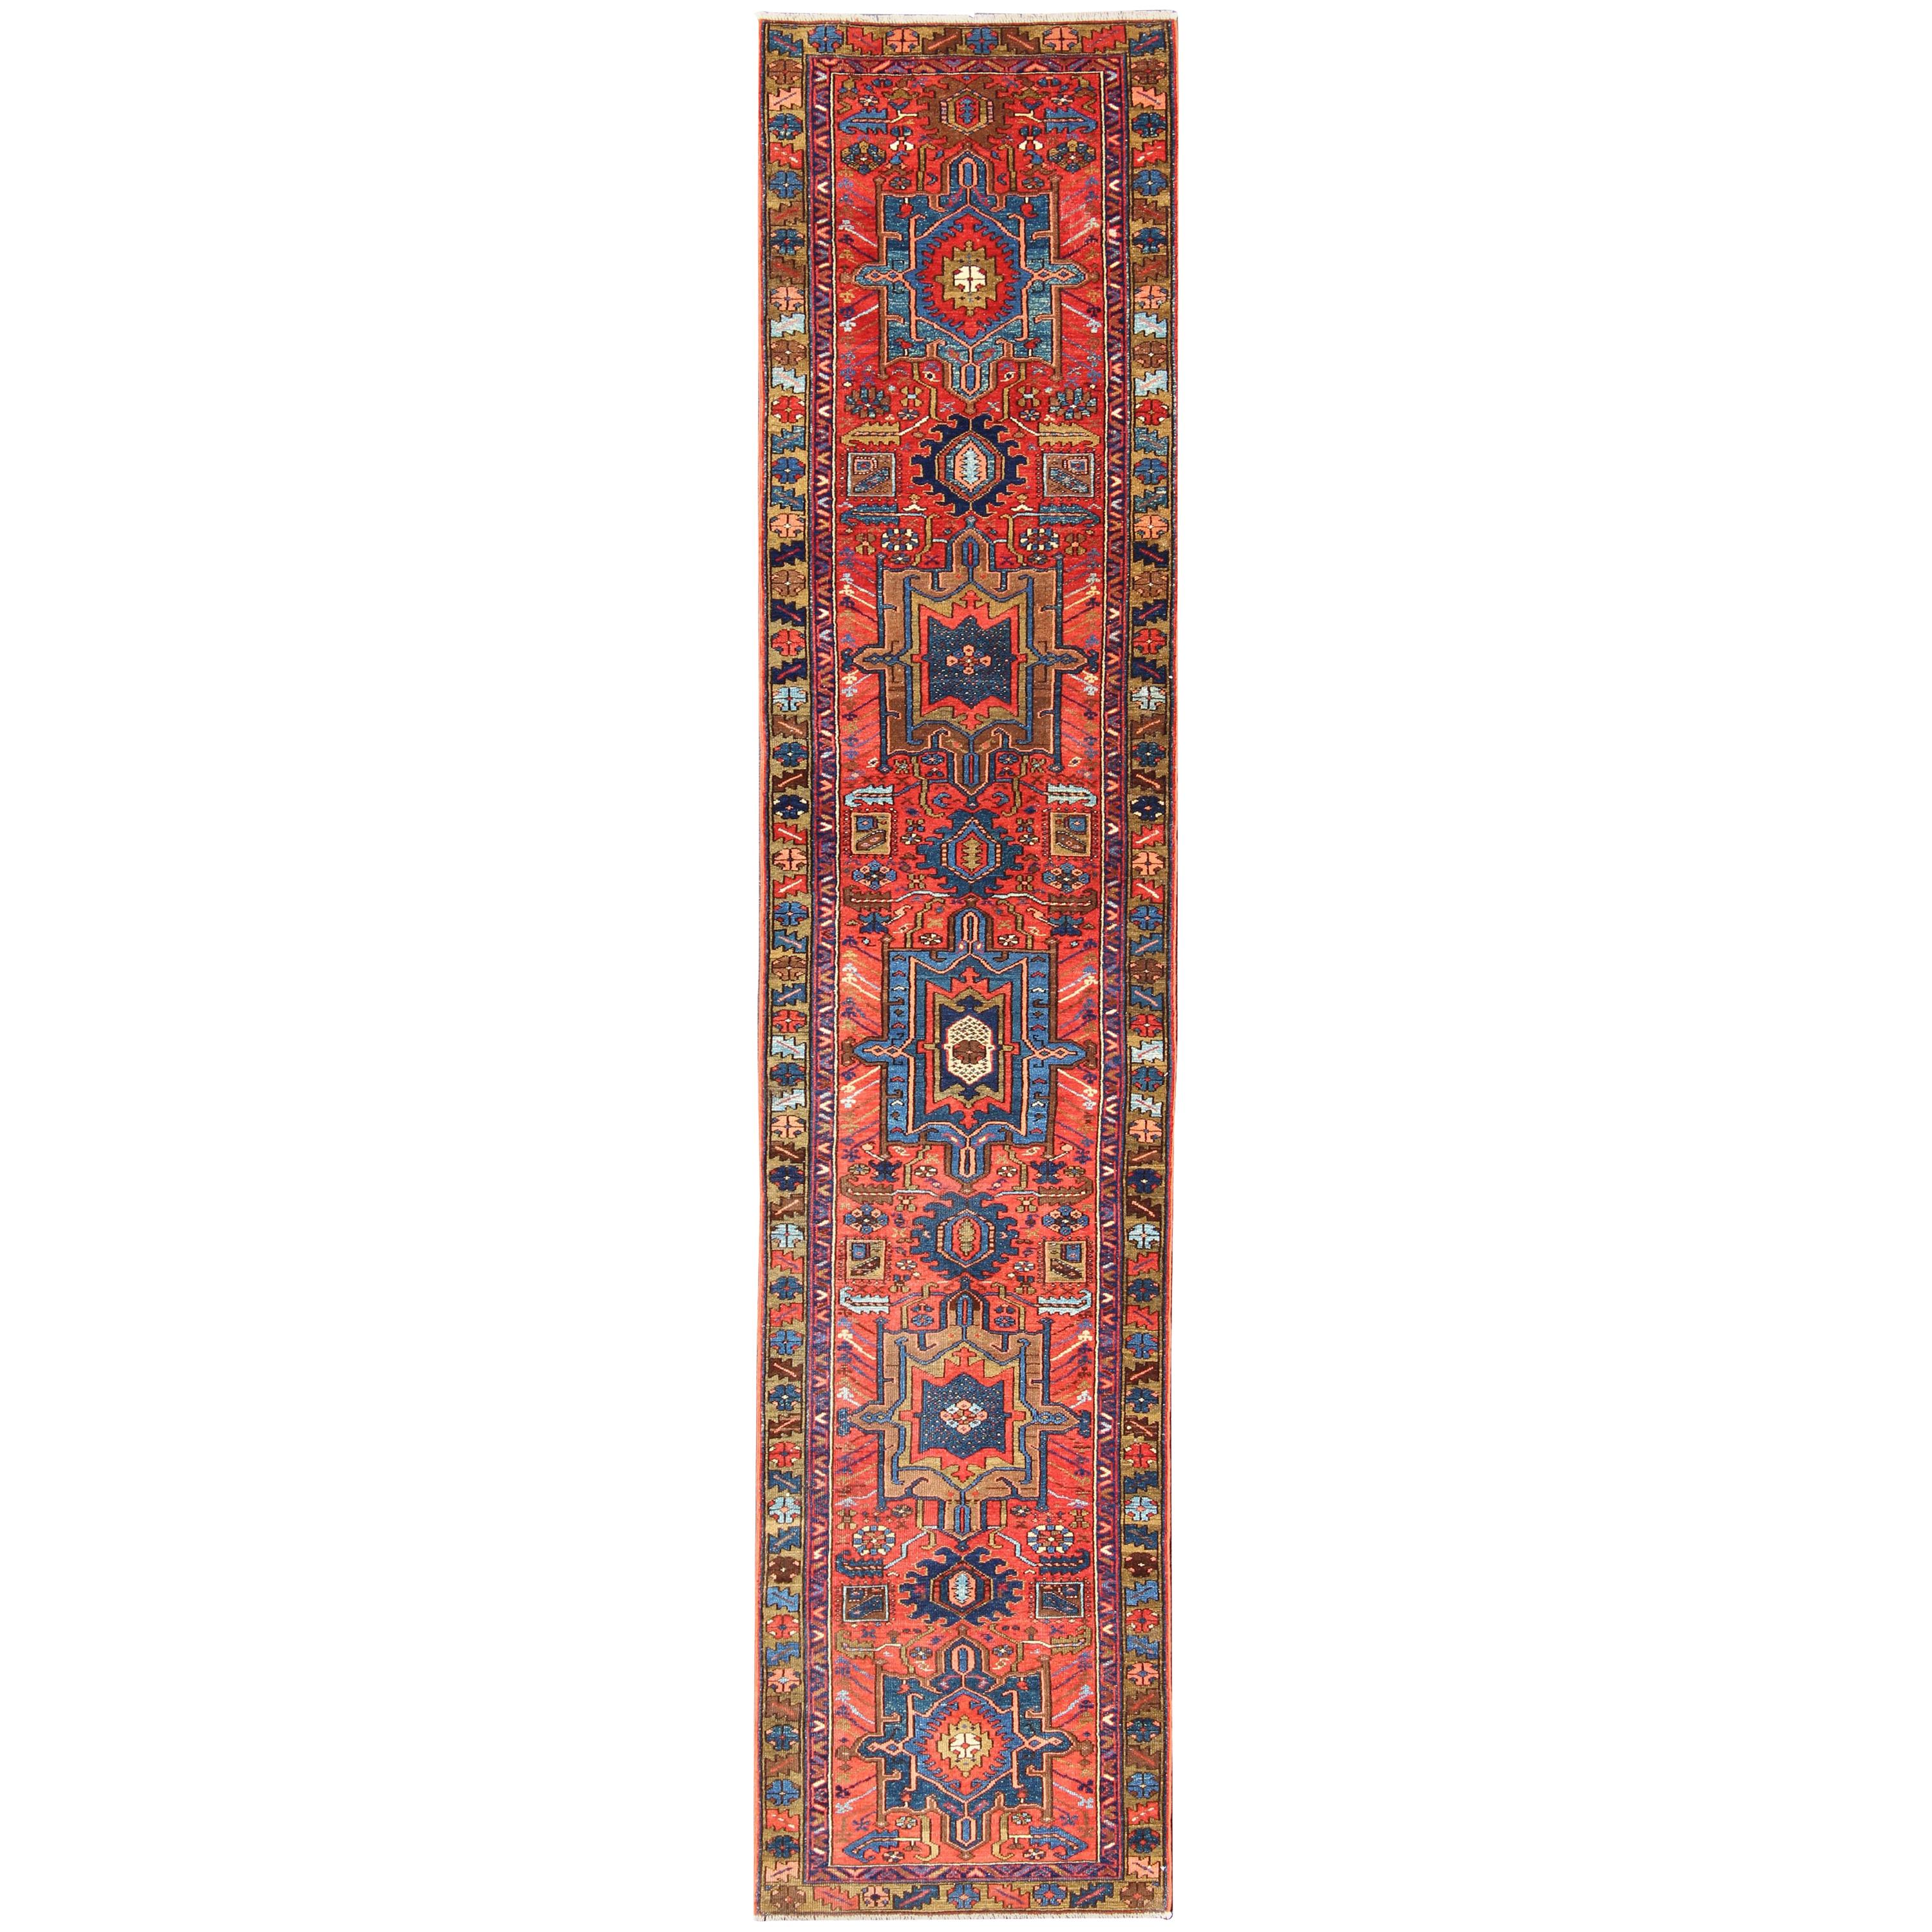 Antique Persian Karadjeh Runner with Layered Geometric Medallions in Red-Orange